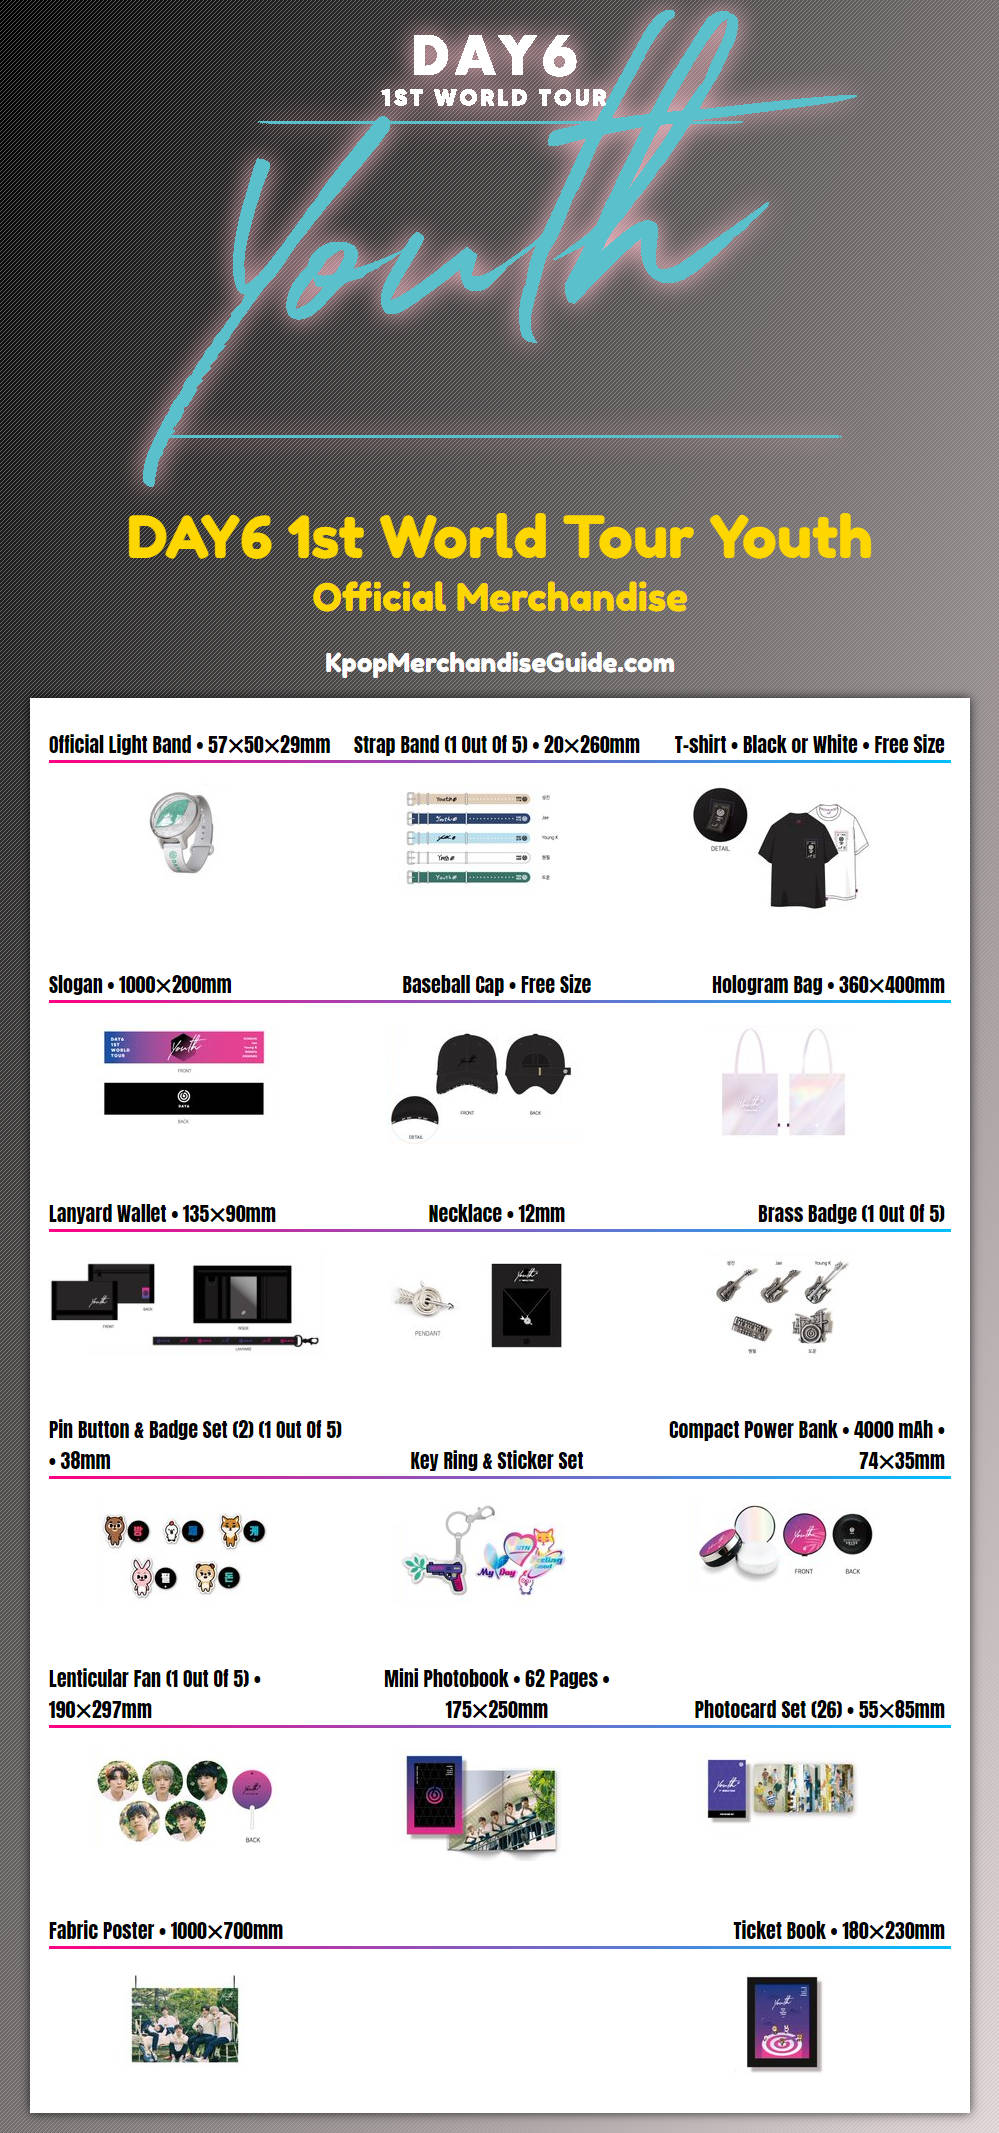 Day6 1st World Tour Youth Merchandise